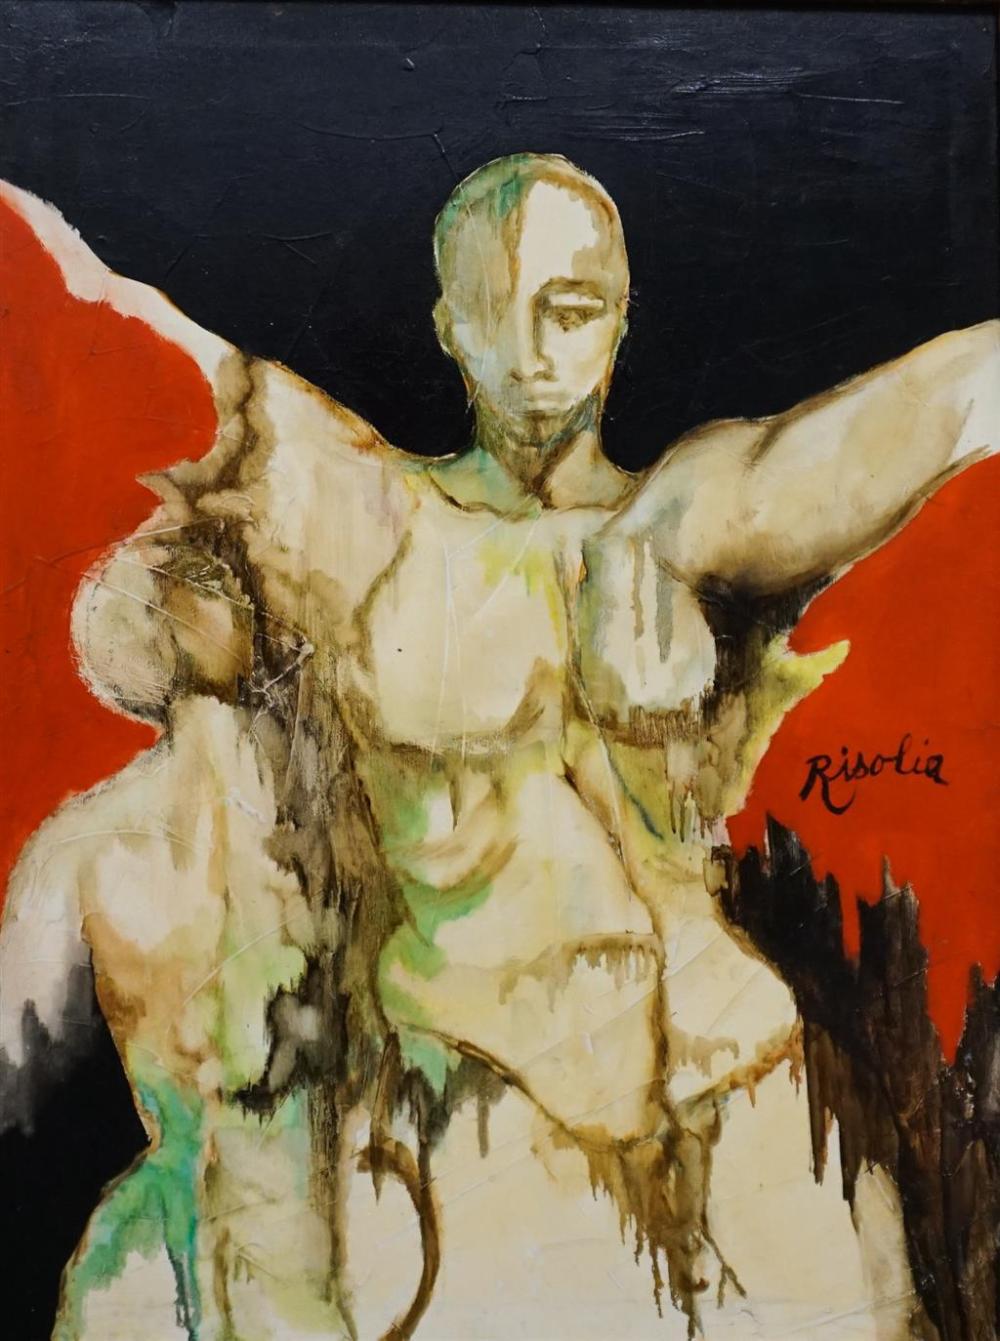 RISOLIA, ABSTRACTED WOMEN, OIL